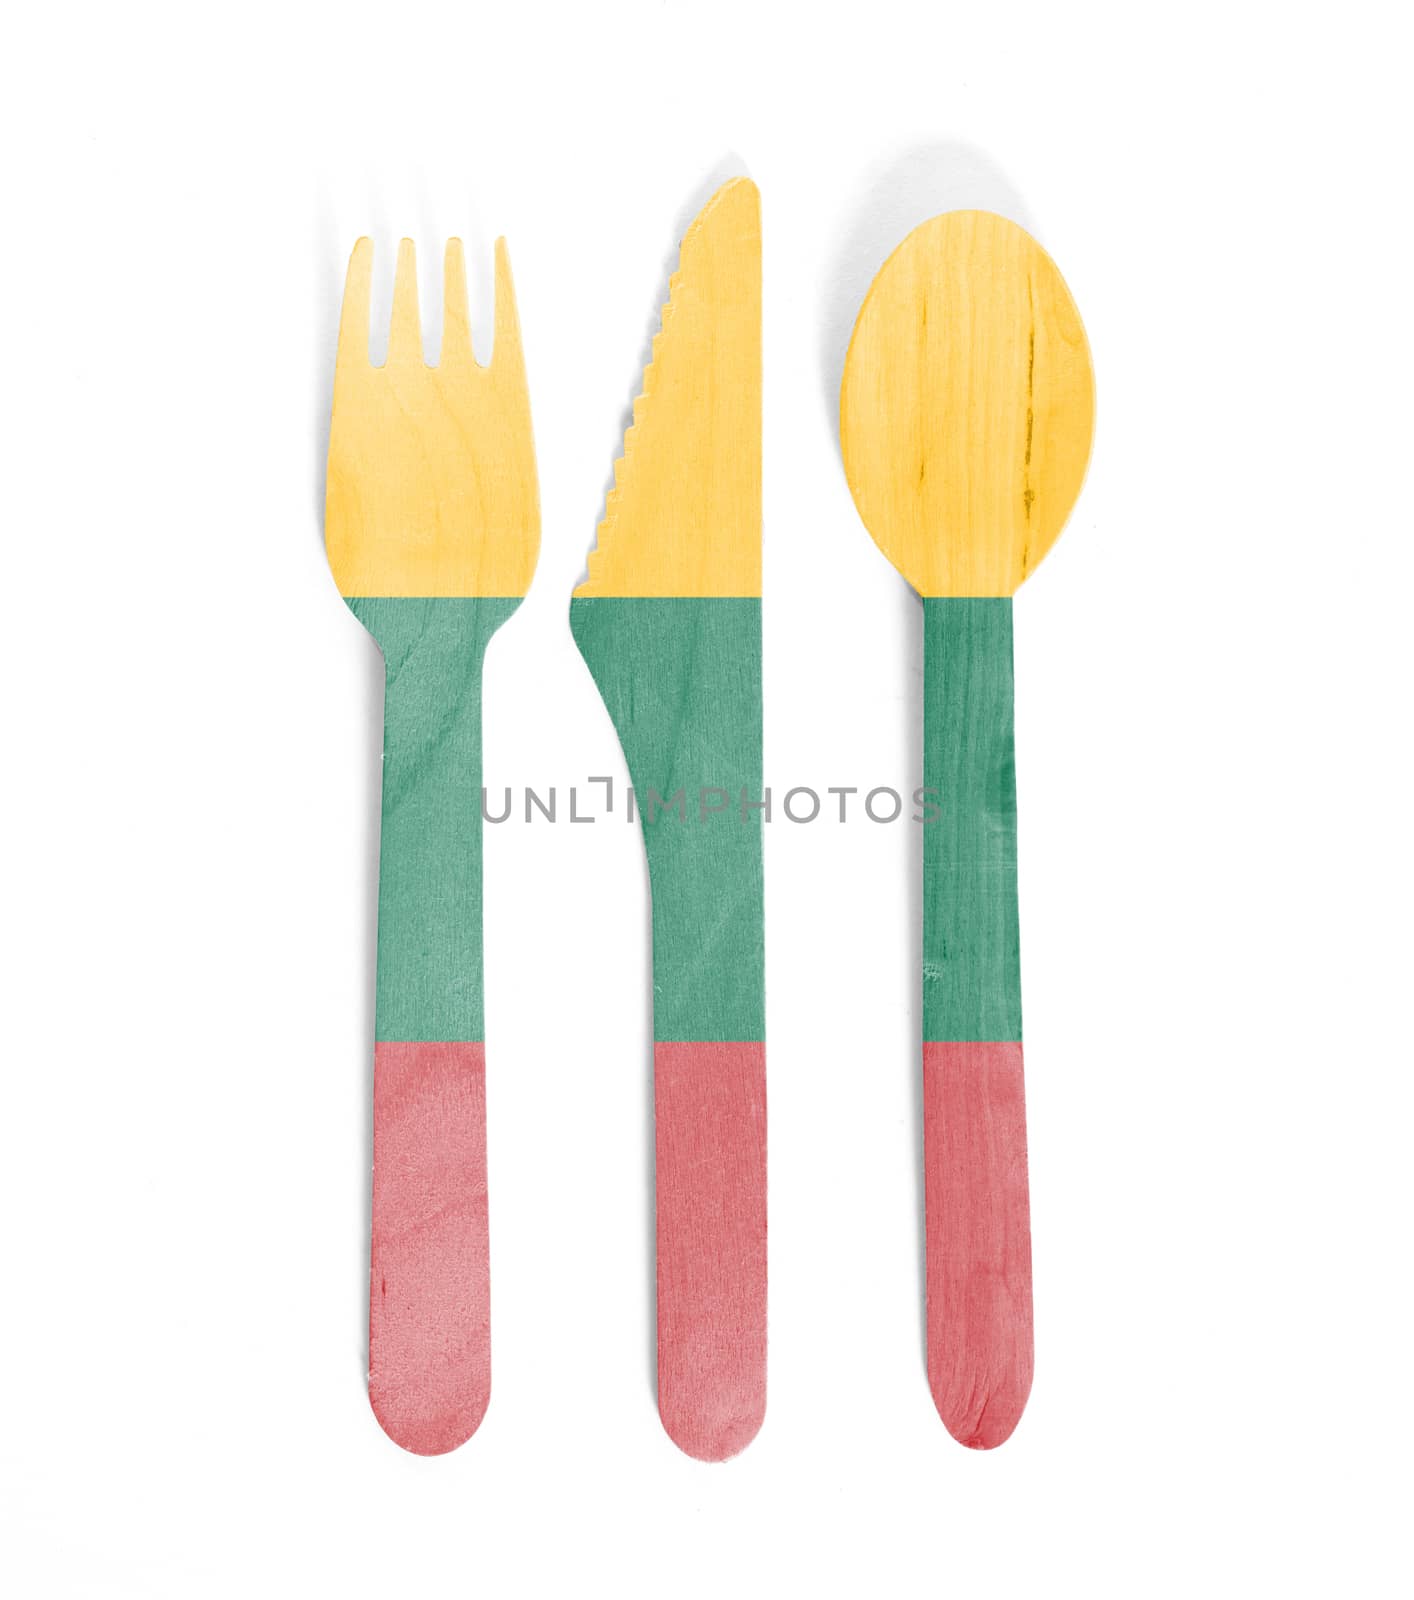 Eco friendly wooden cutlery - Plastic free concept - Isolated - Flag of Lithuania